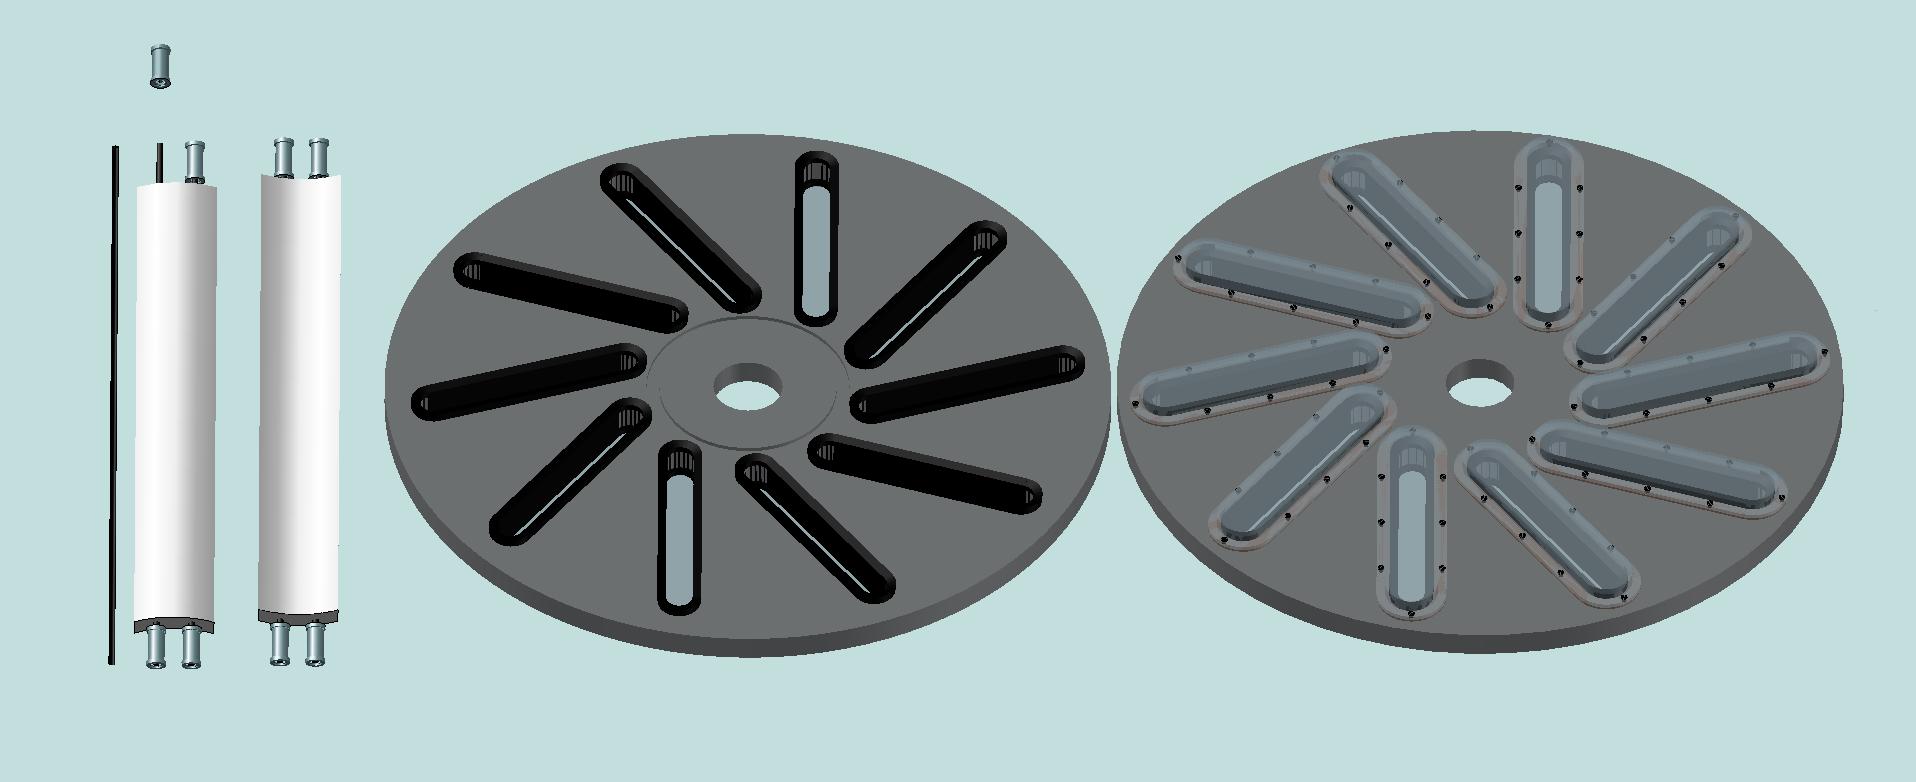 The movable loads and their structure, and also the appearance of the disk from two sides.